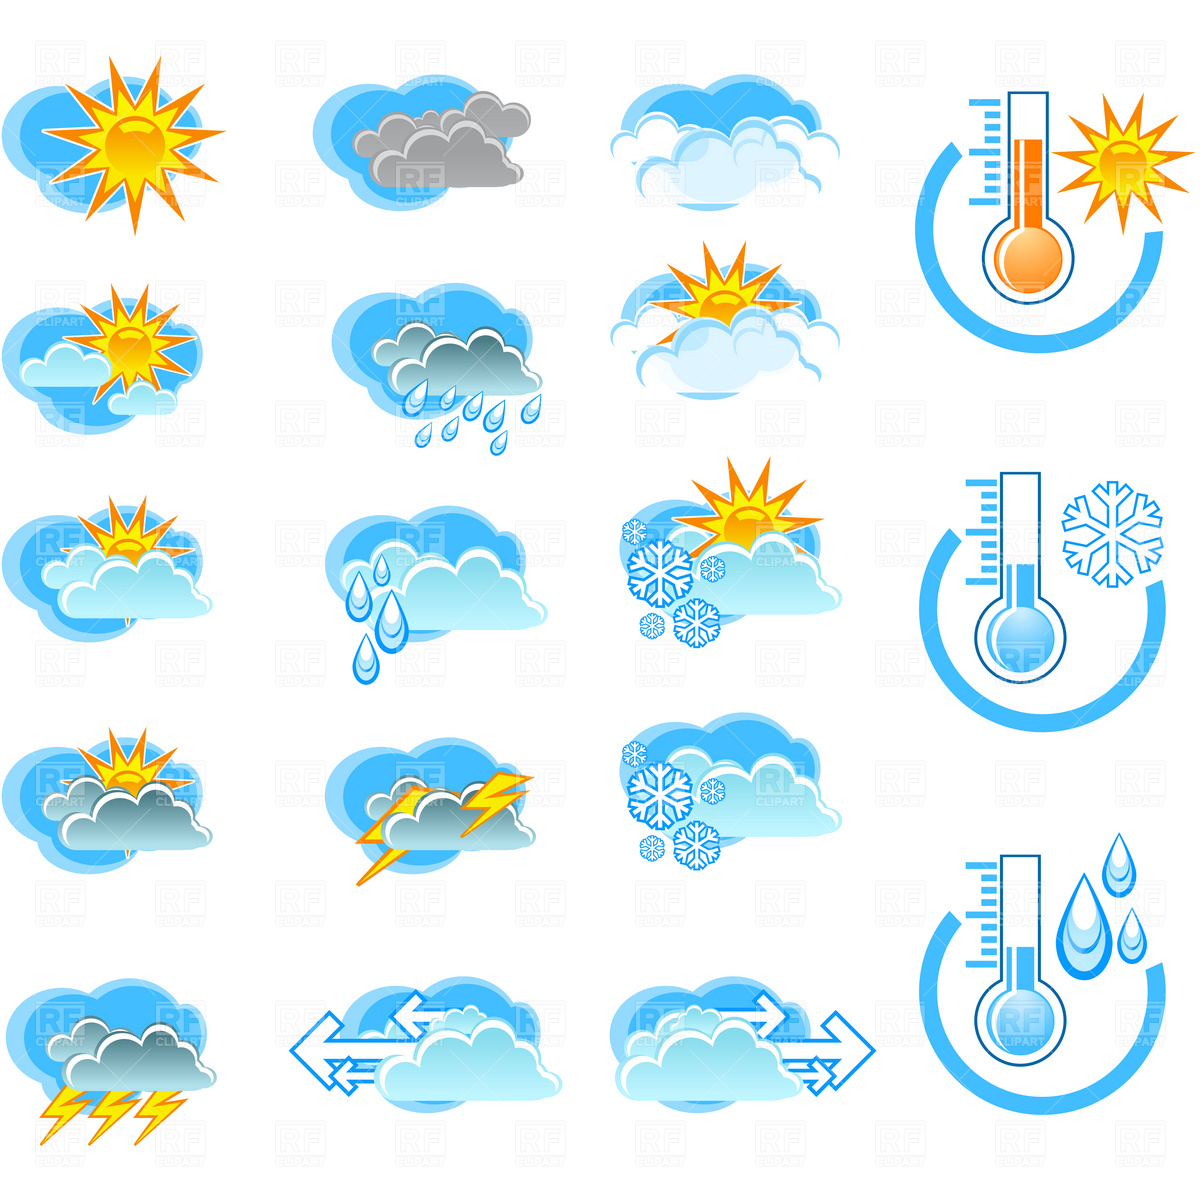 Free weather clip art.